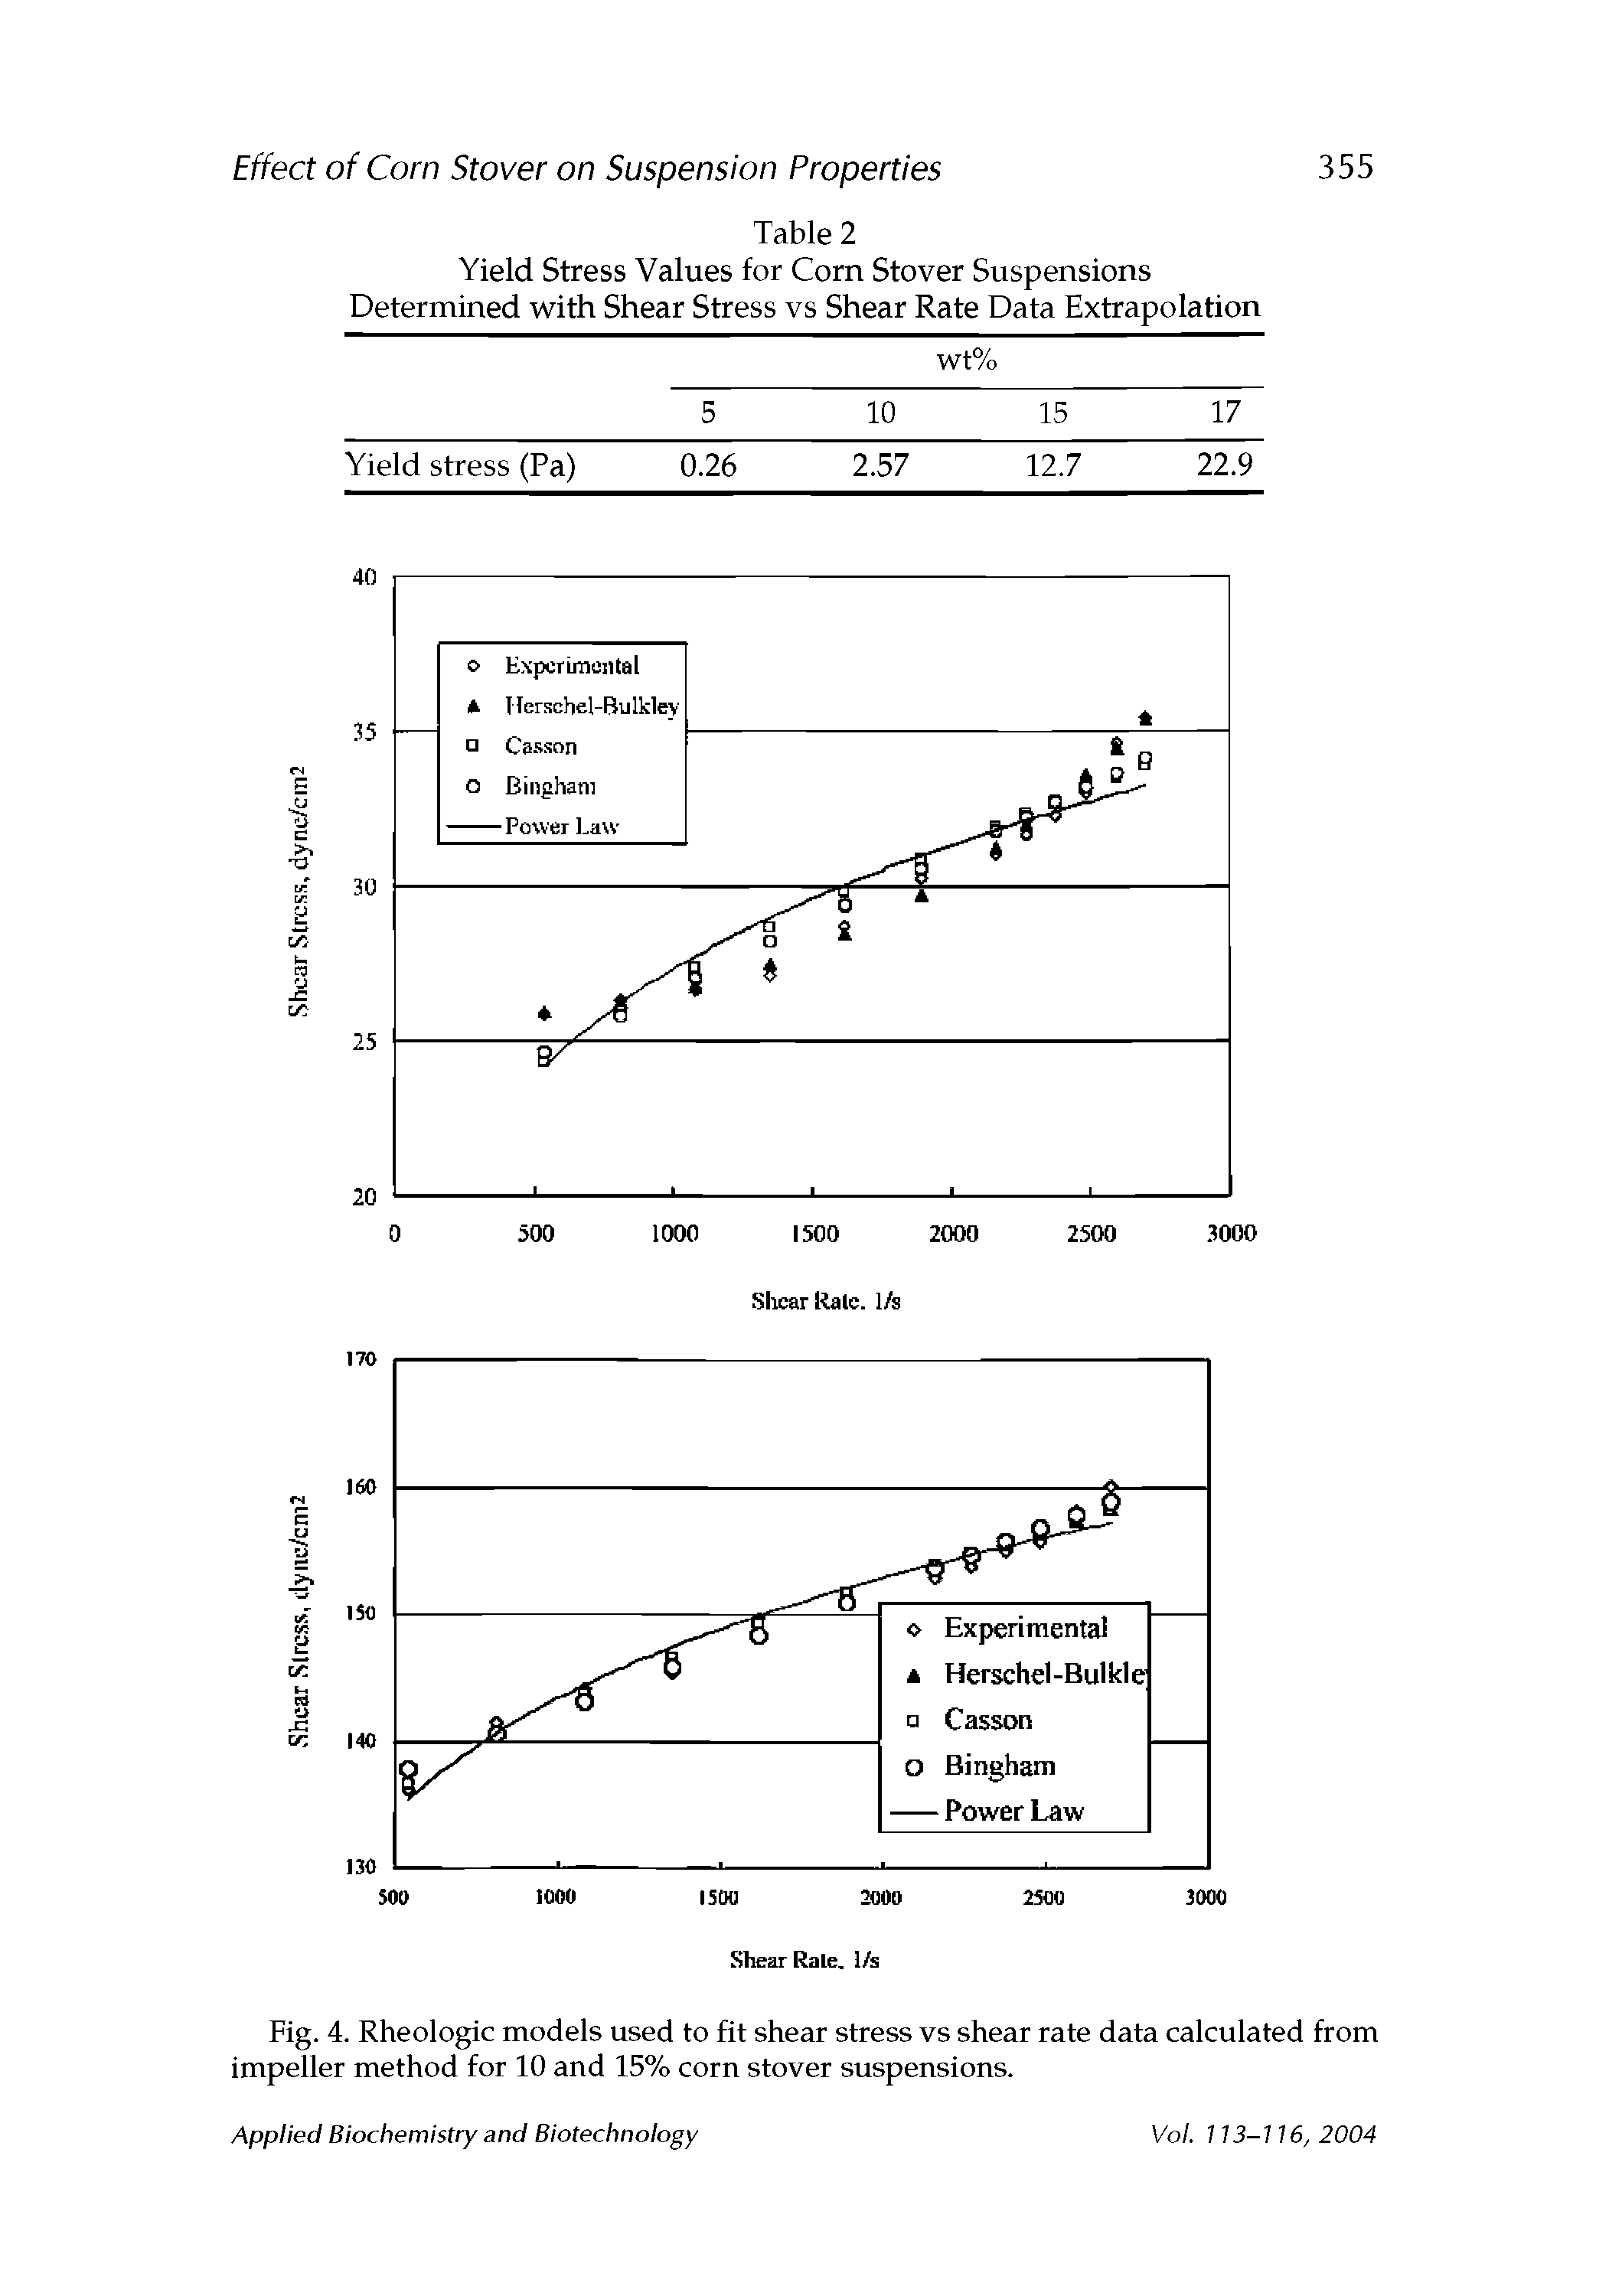 Fig. 4. Rheologic models used to fit shear stress vs shear rate data calculated from impeller method for 10 and 15% corn stover suspensions.